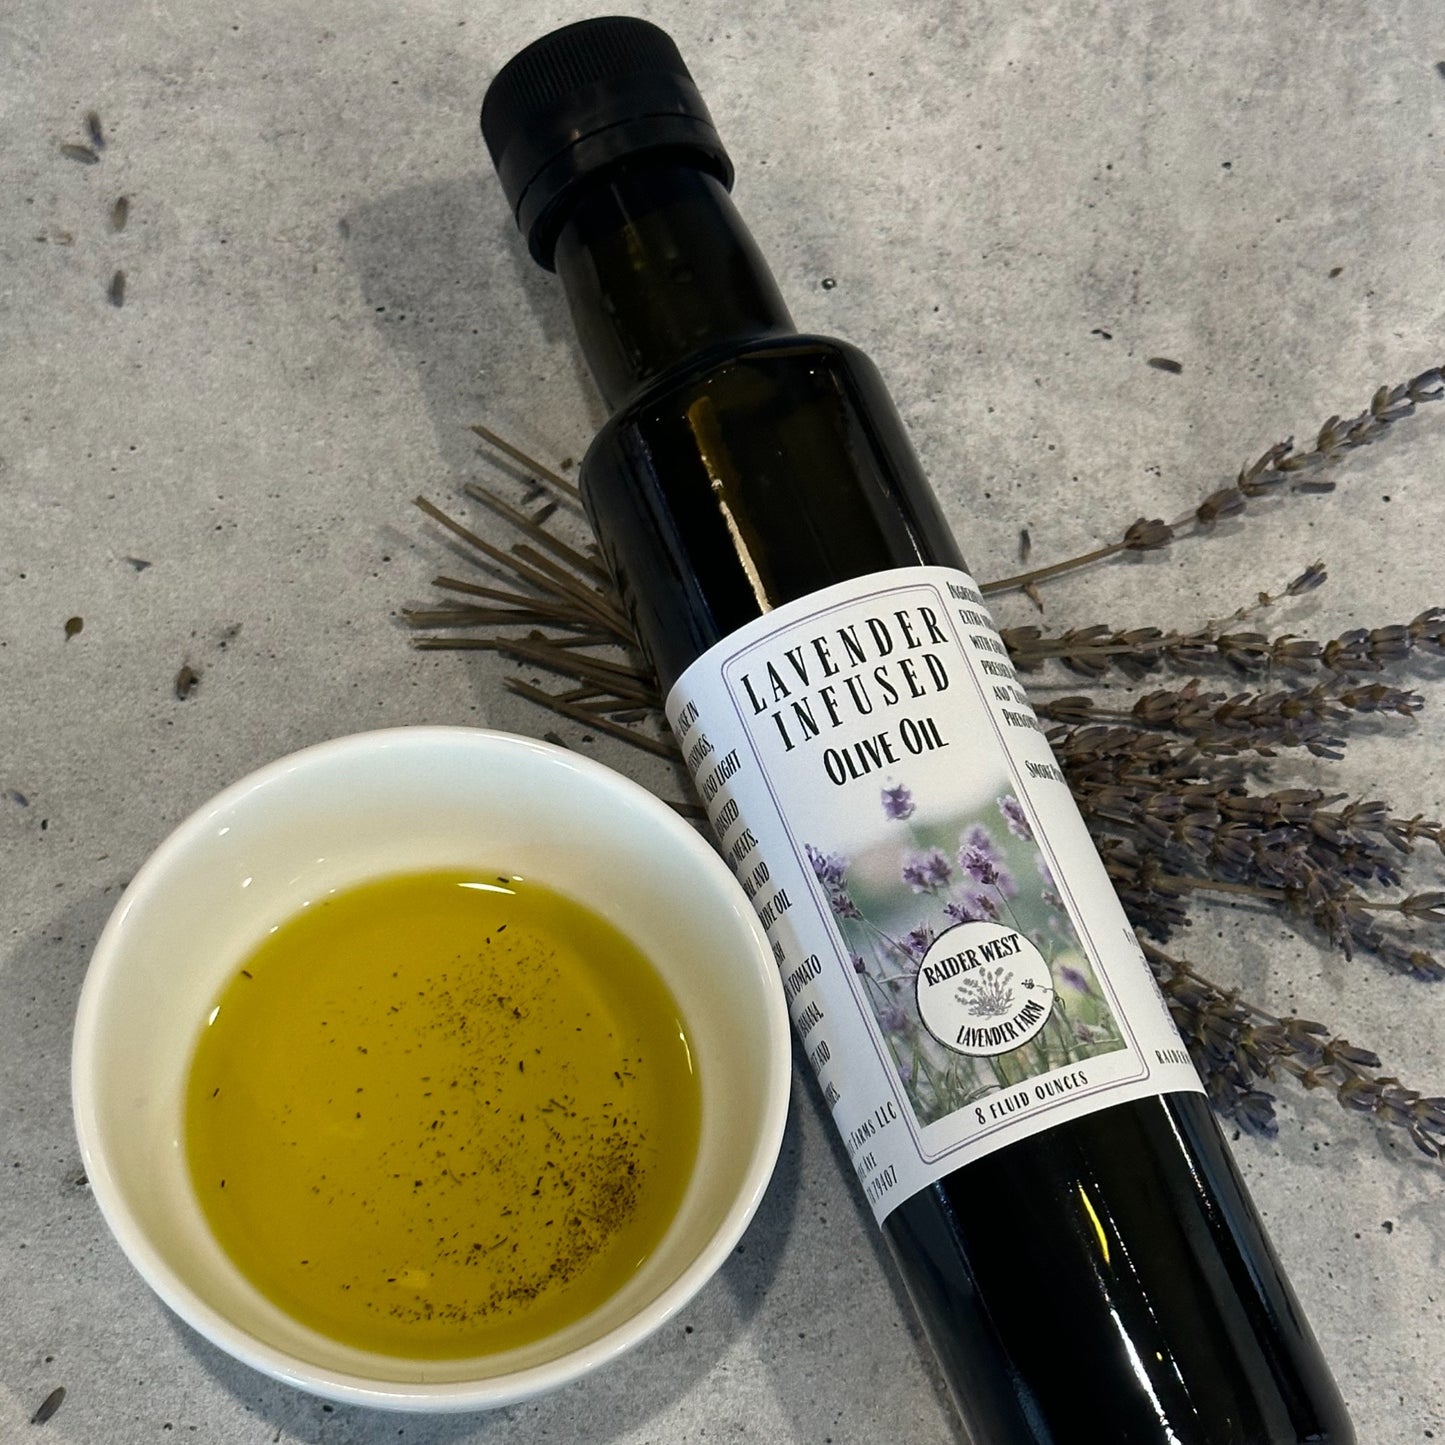 Raider West Lavender Farm features a lavender infused olive oil. Based out of Lubbock, TX and making a wide variety of lavender recipes. 